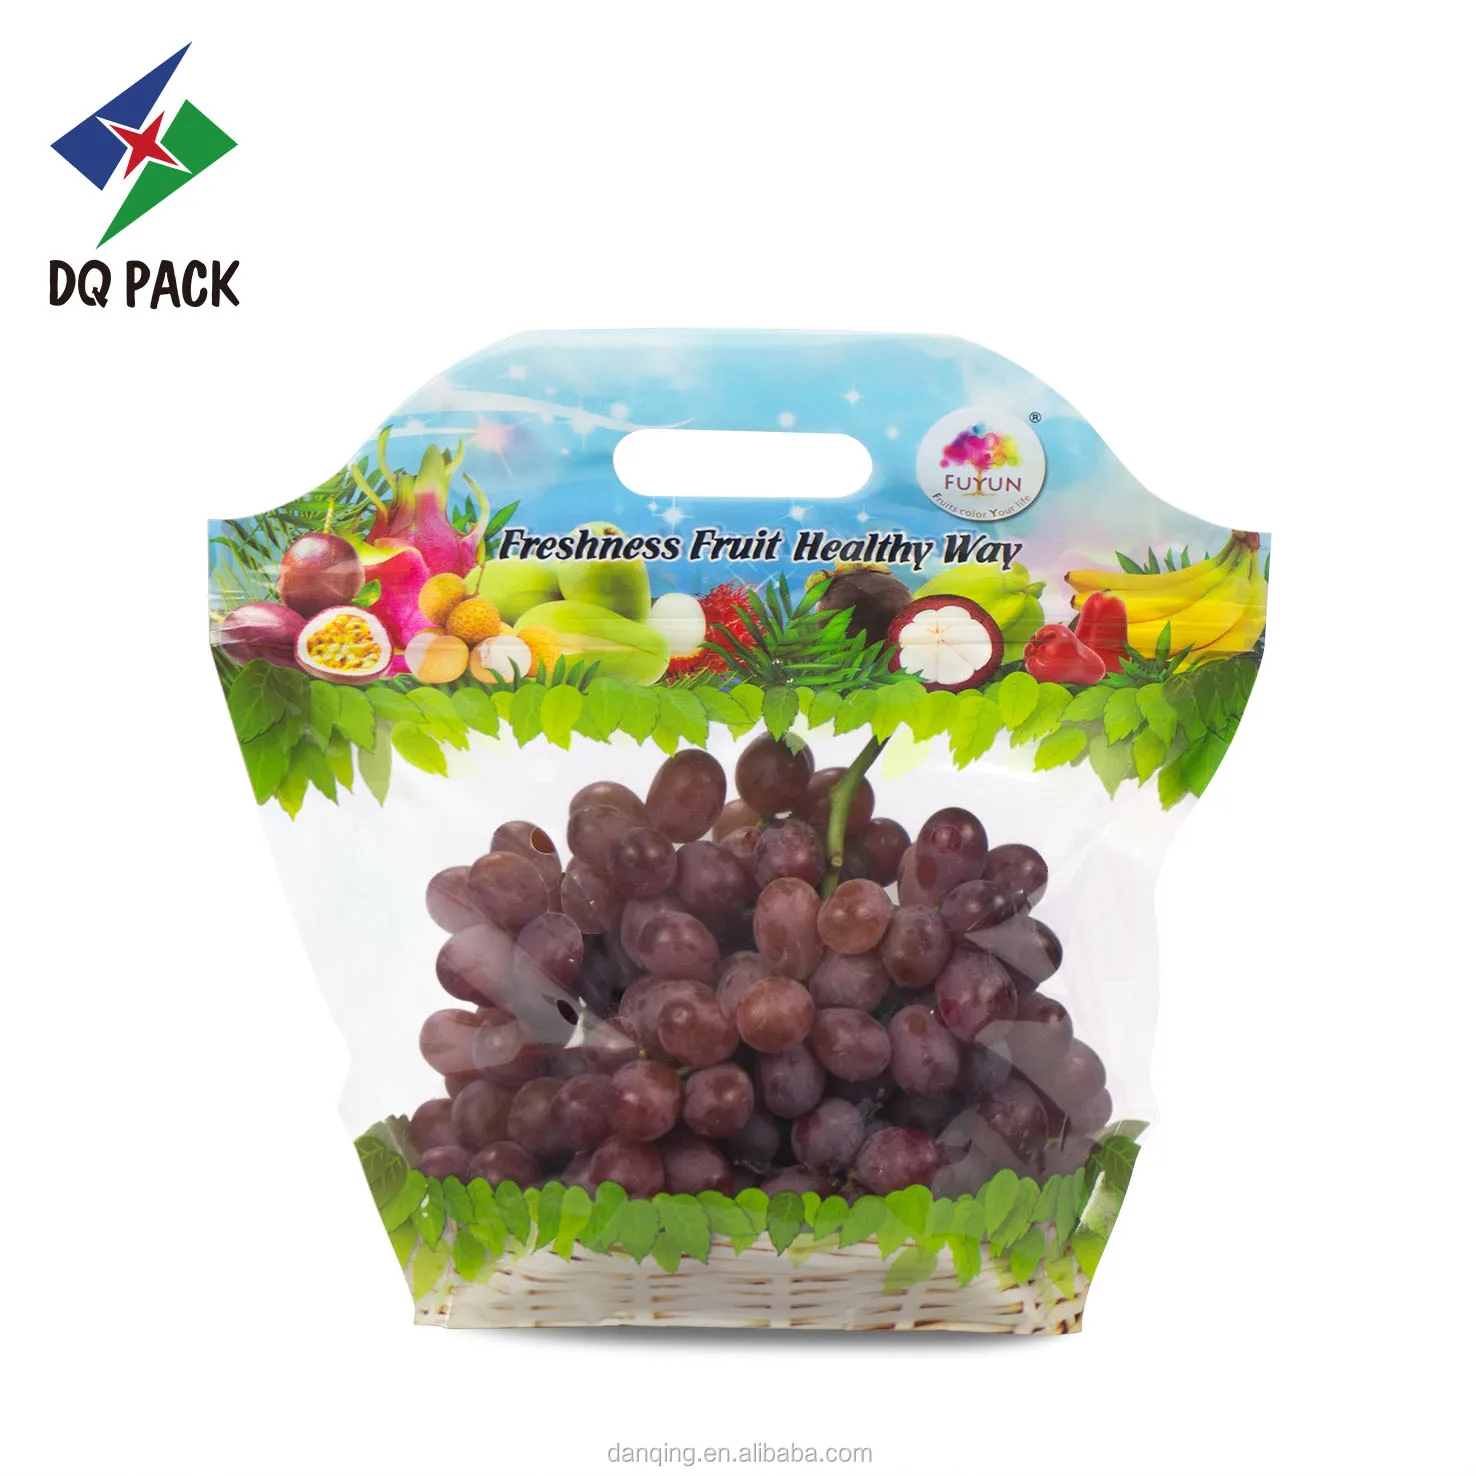 Food grade plastic packaging with custom Printed Fruit vent bag With Zipper